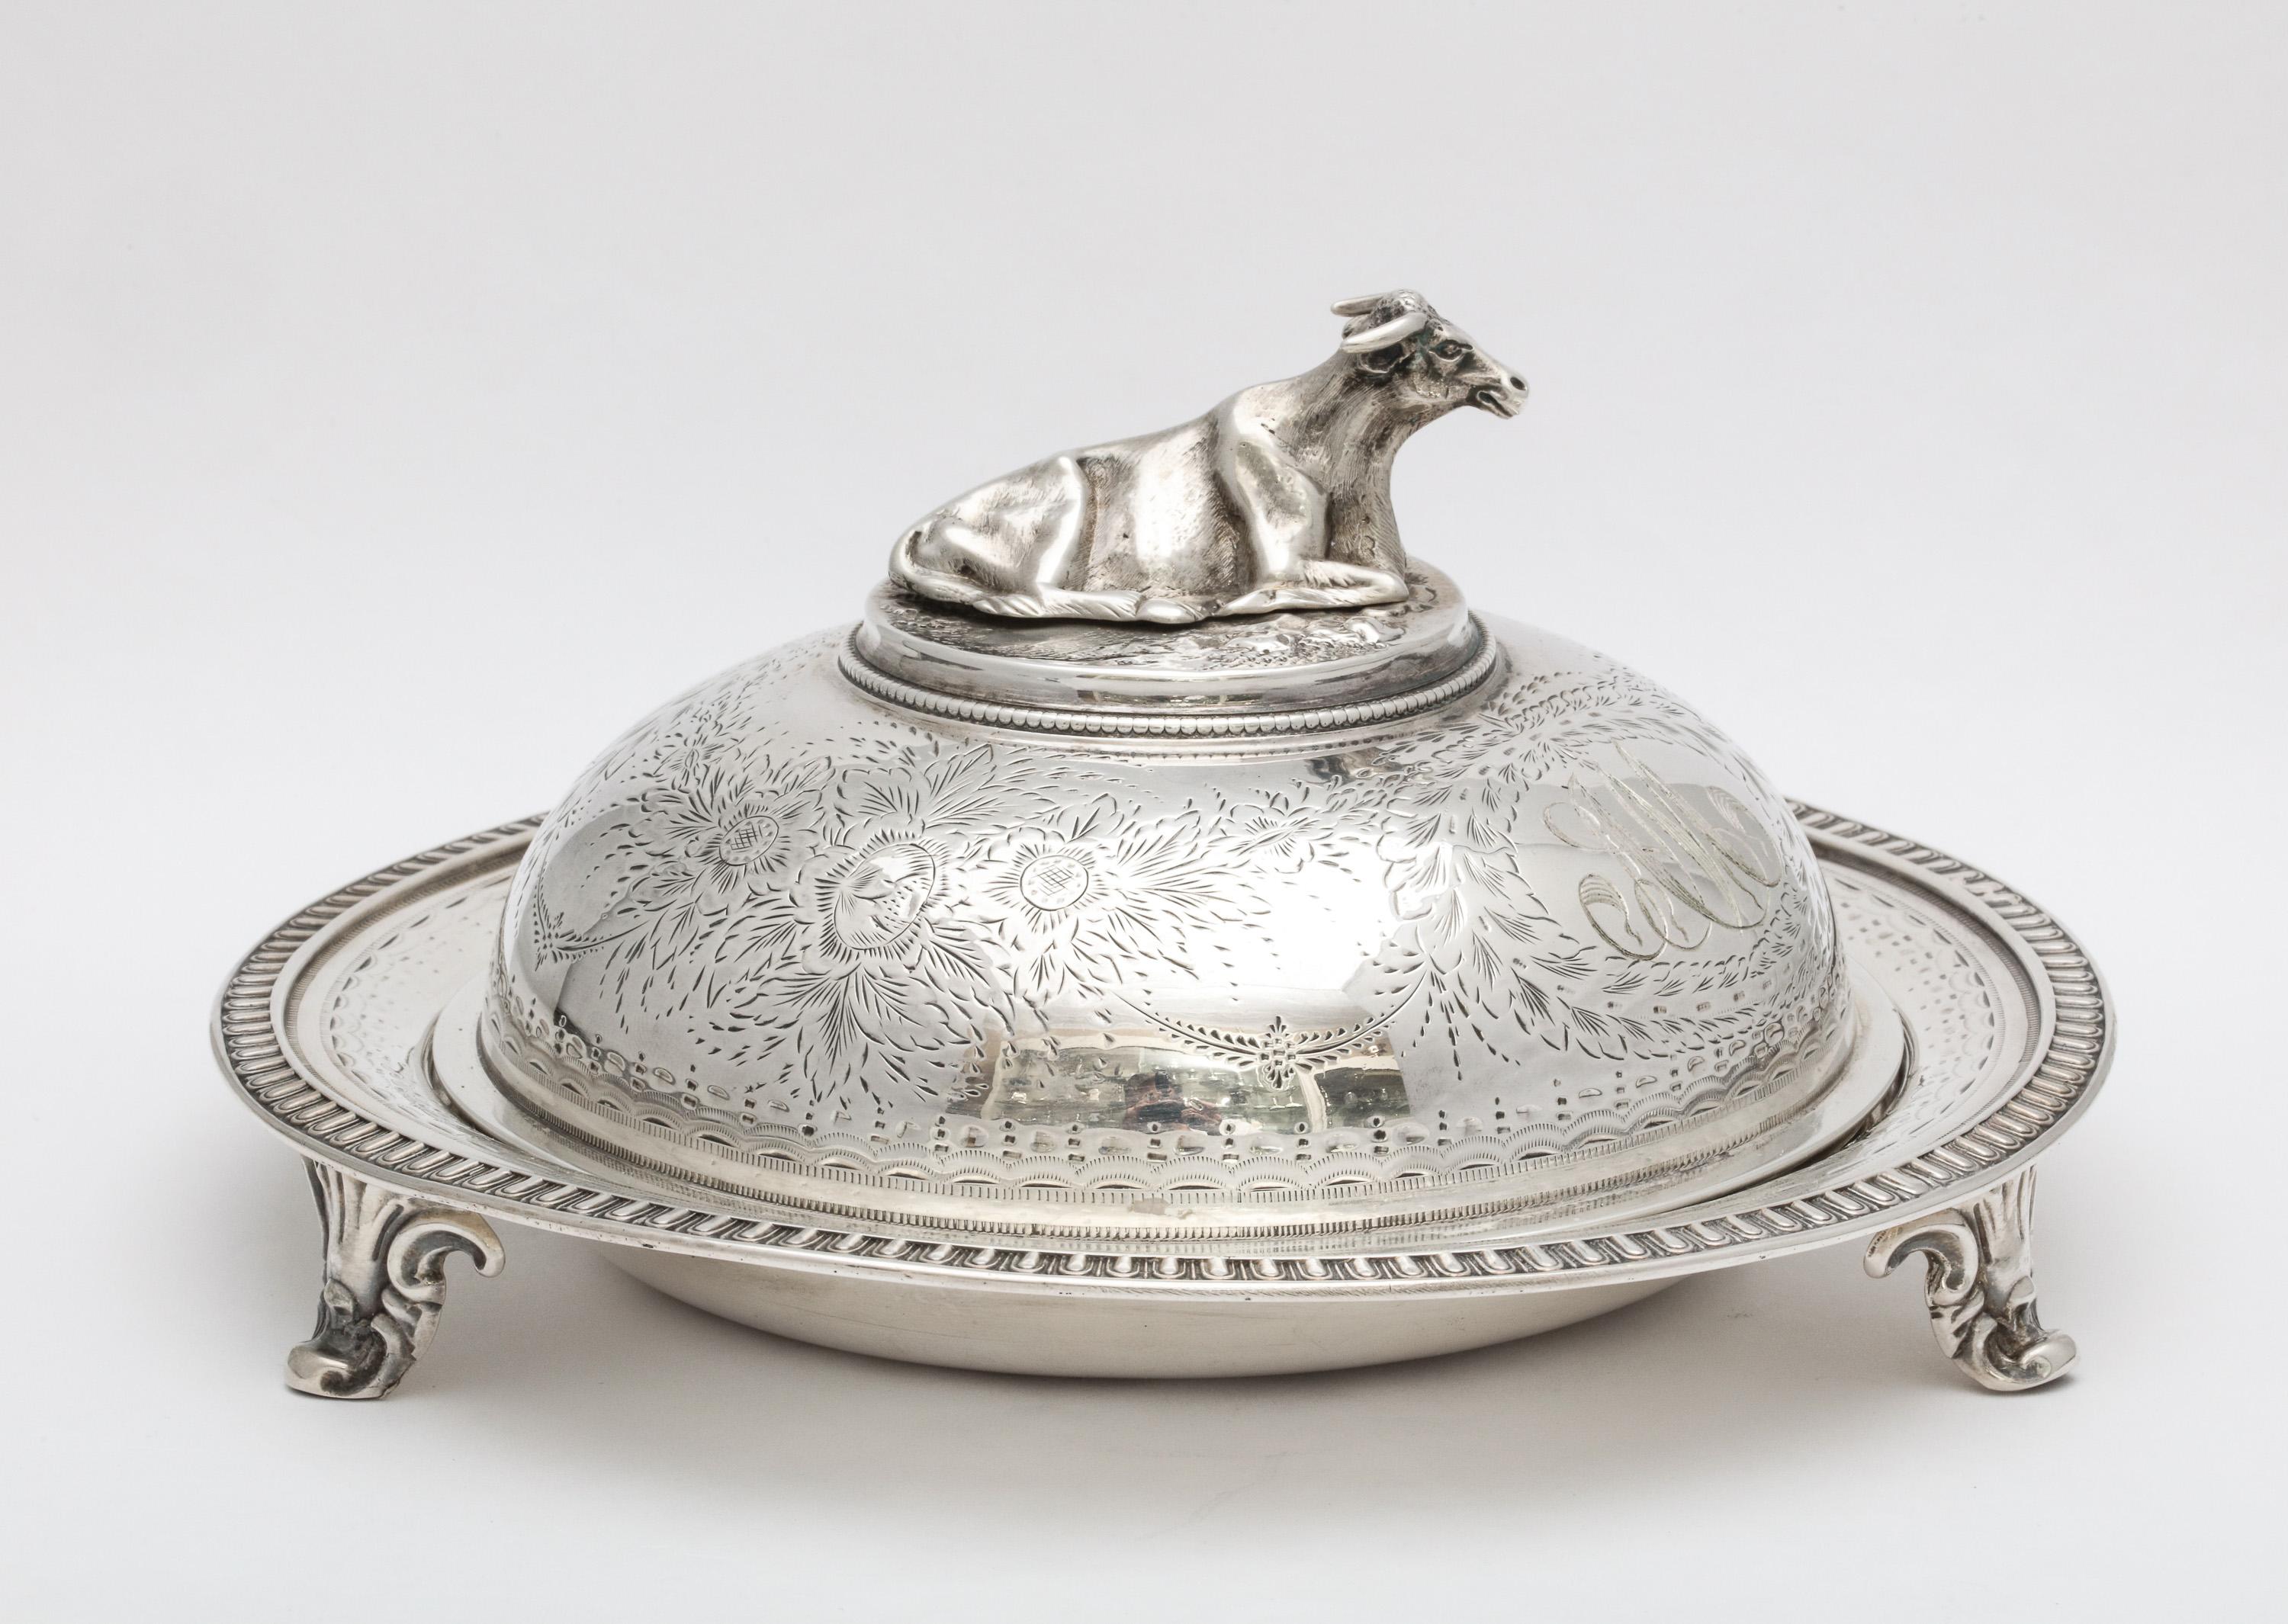 Neoclassical, sterling silver, covered, footed butter dish with removable, pierced insert, New York, year hallmarked for 1859, Gale & Willis - makers. Lid has a cow finial. Measures 4 1/4 inches high x 7 inches diameter. Total weight is 12.795 troy